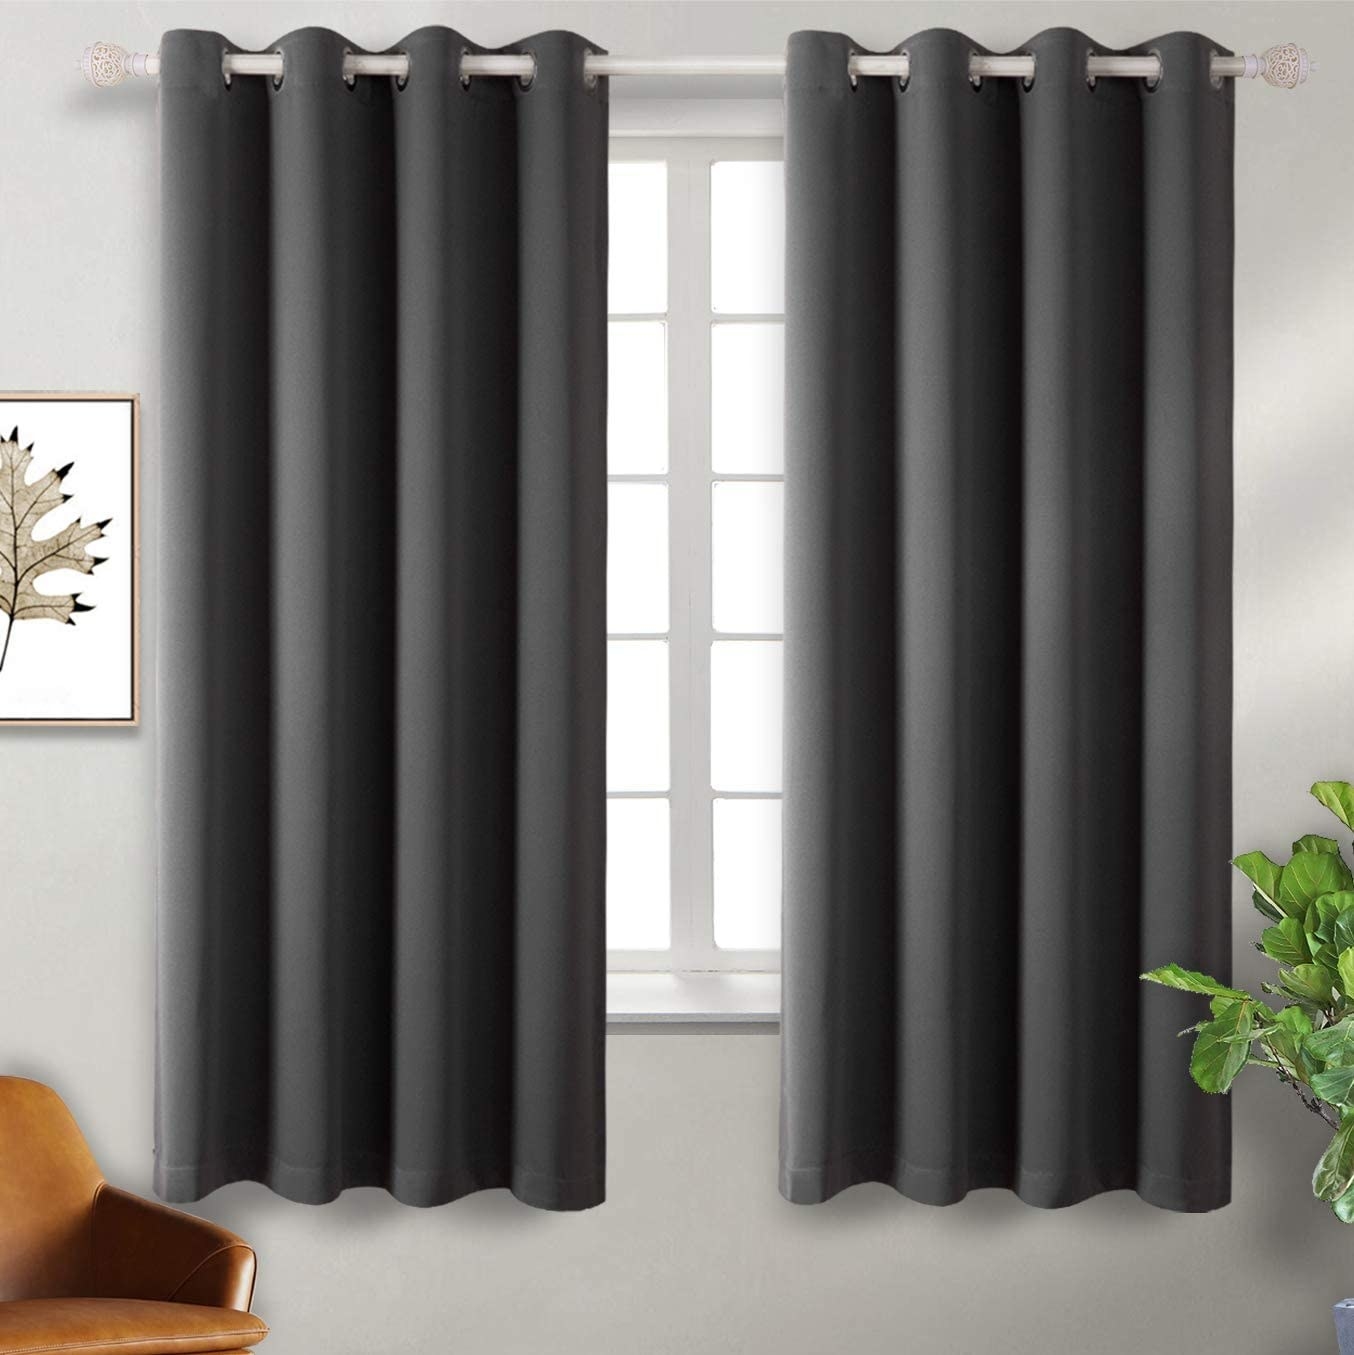 A pair of curtains hanging from a window in a living room